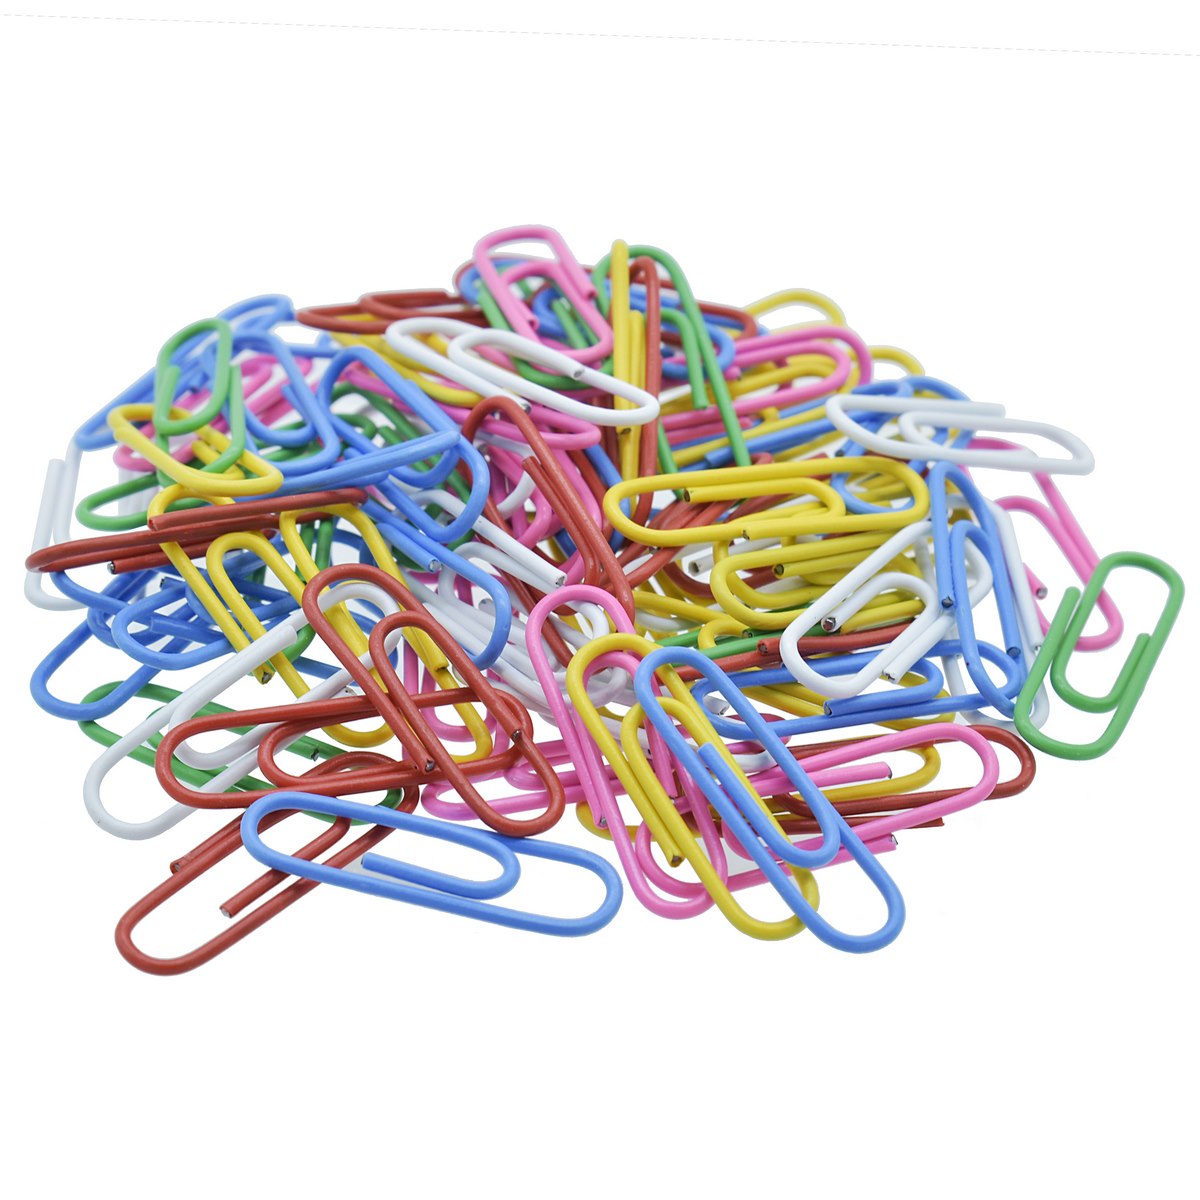 jags-mumbai Clip Colorful Assorted Paper Clips - 28MM, 40 Grams (CUPC28MM)